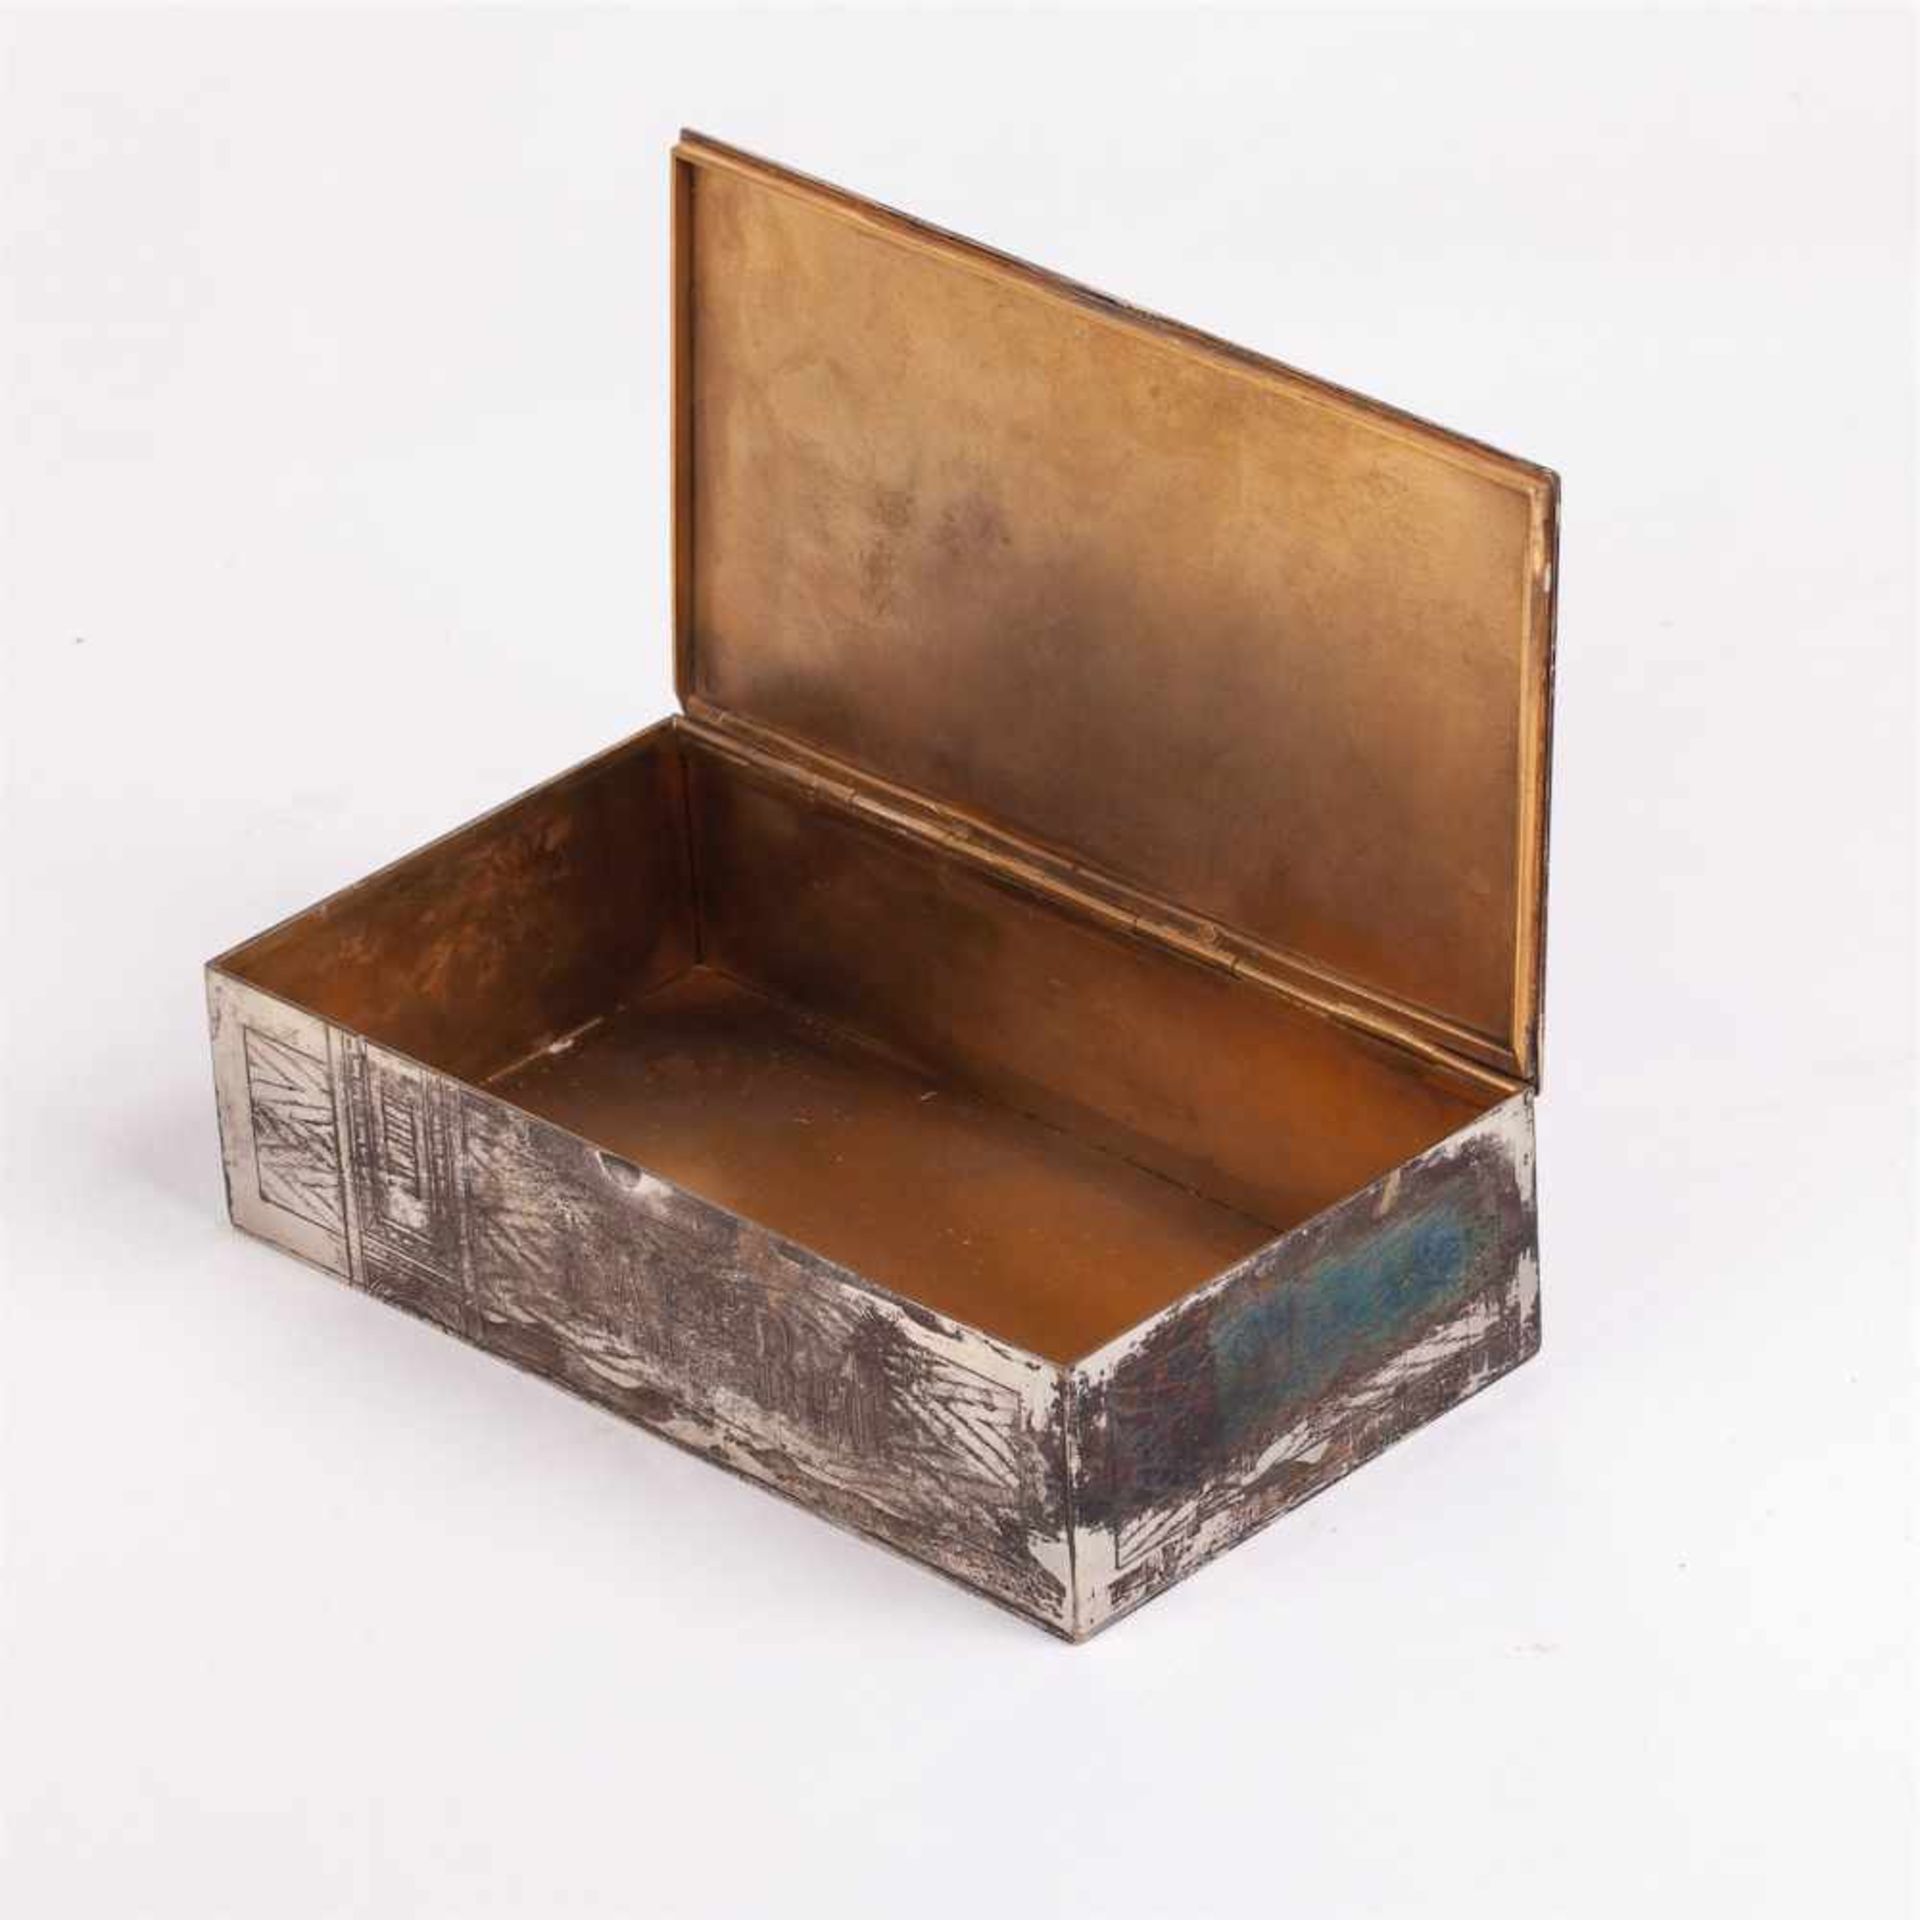 A Russian silver plated and gilded cigar boxA Russian silver plated and gilded brass cigar box - Image 2 of 4